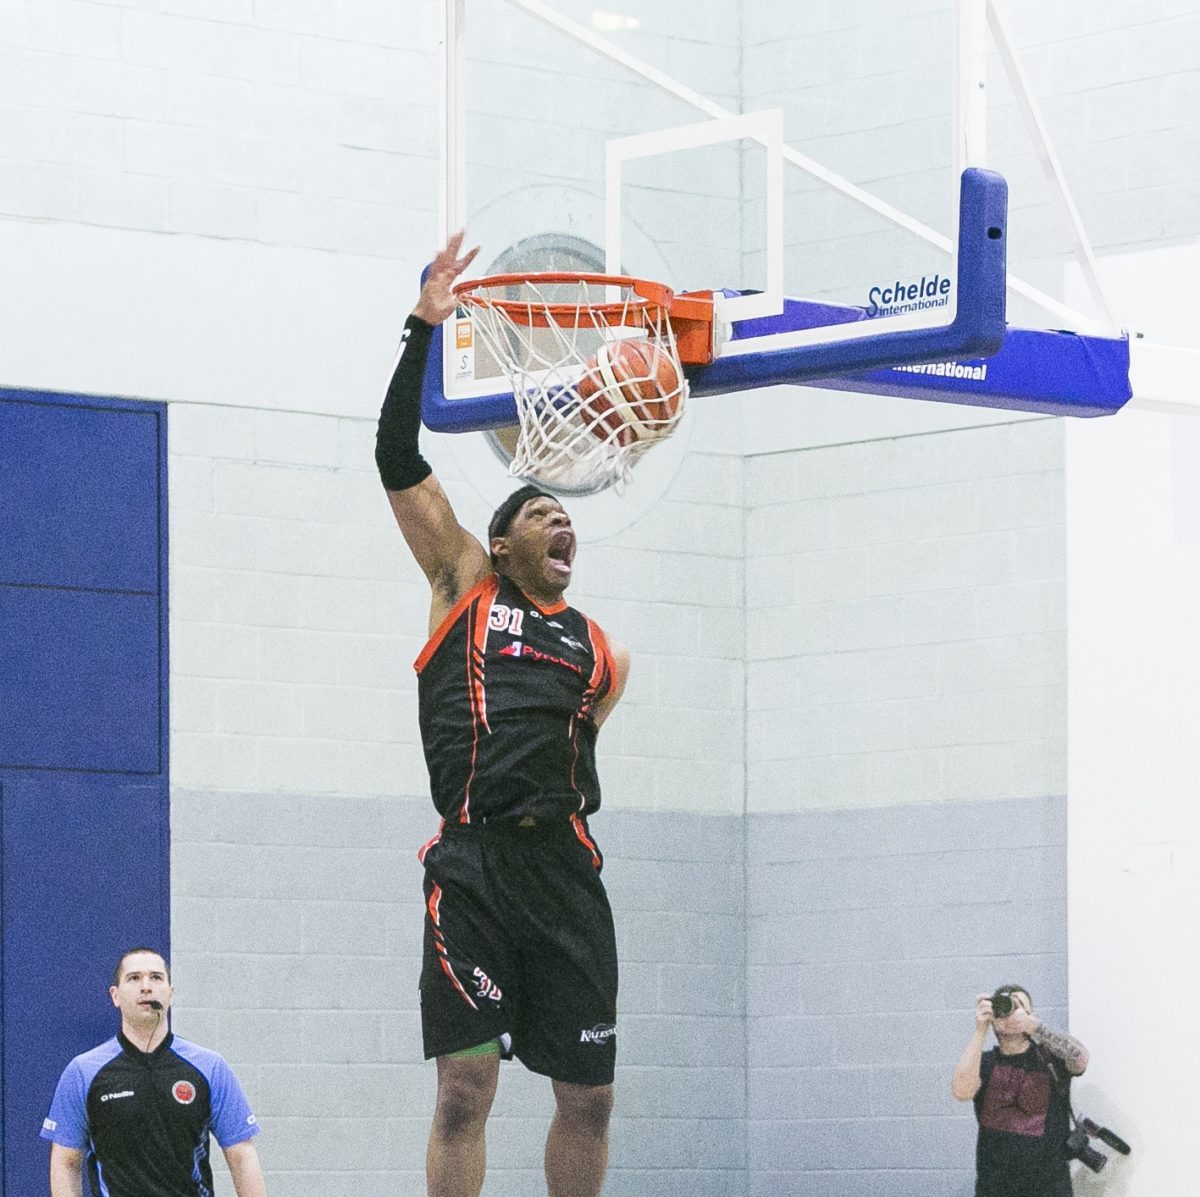 Jermaine Turner dunking in his last ever game - Pic: Michelle LaGrue